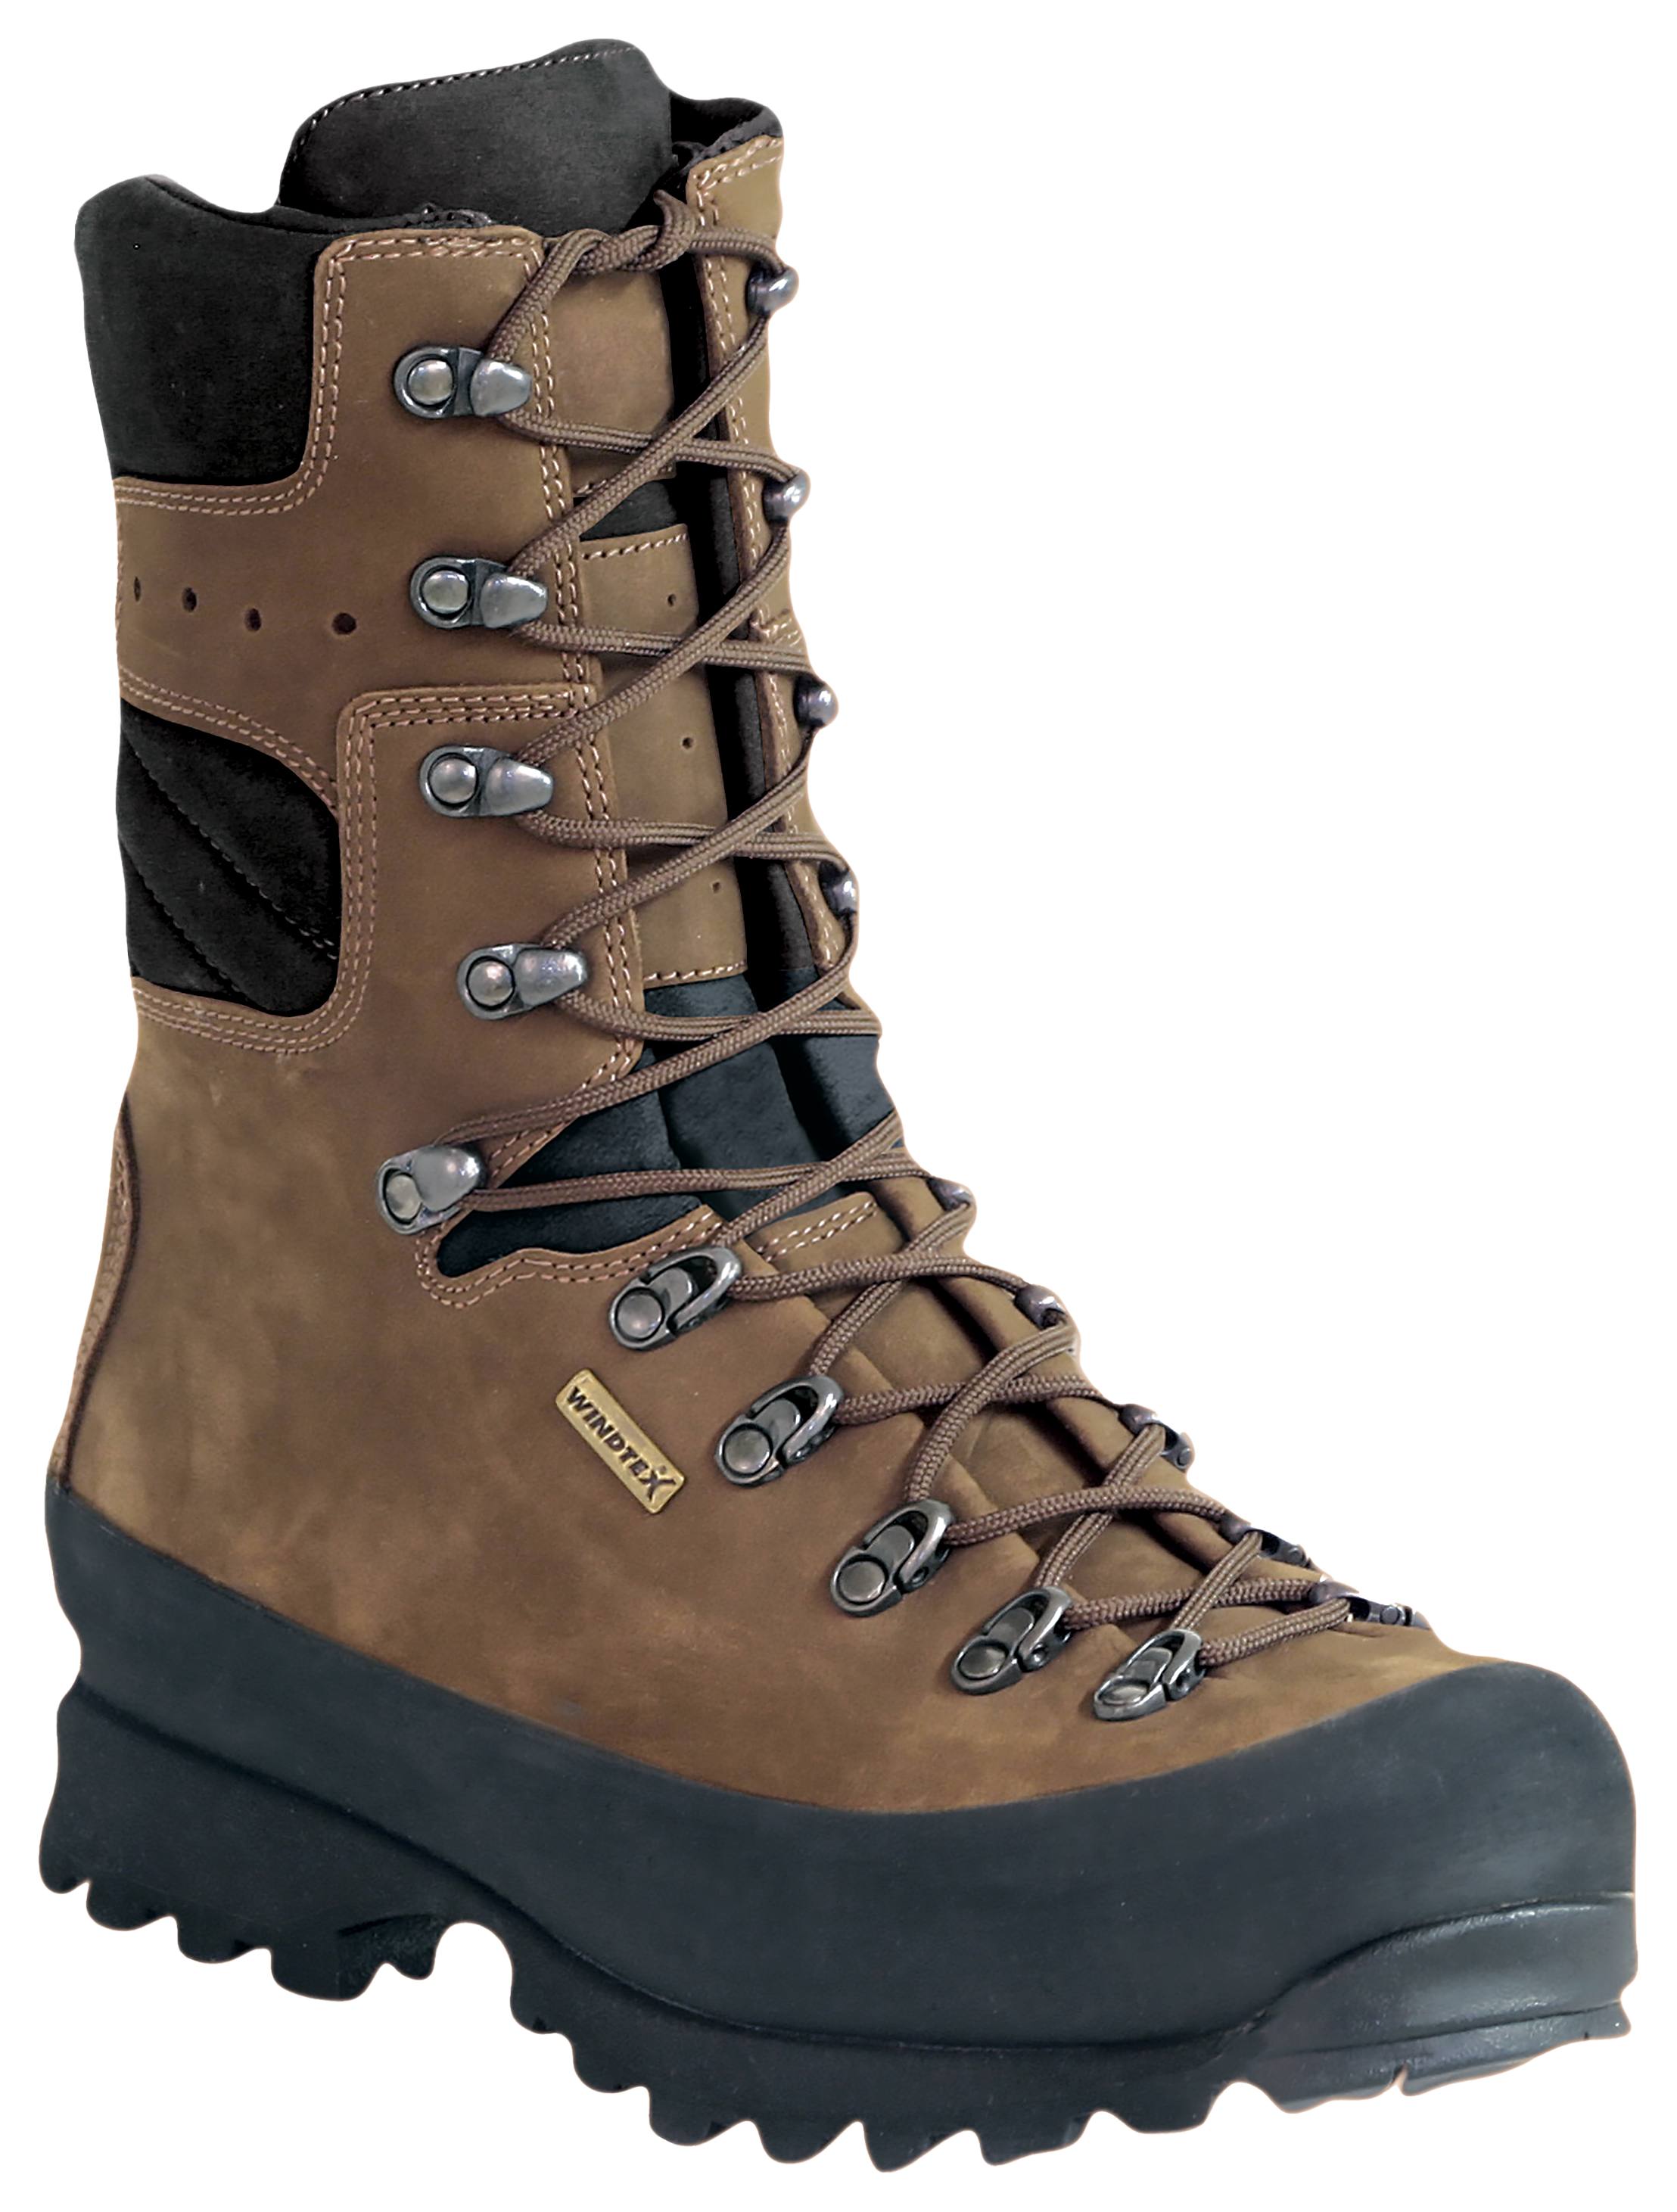 Kenetrek Mountain Extreme 1000 Insulated Waterproof Hunting Boots for Men - Brown - 9M